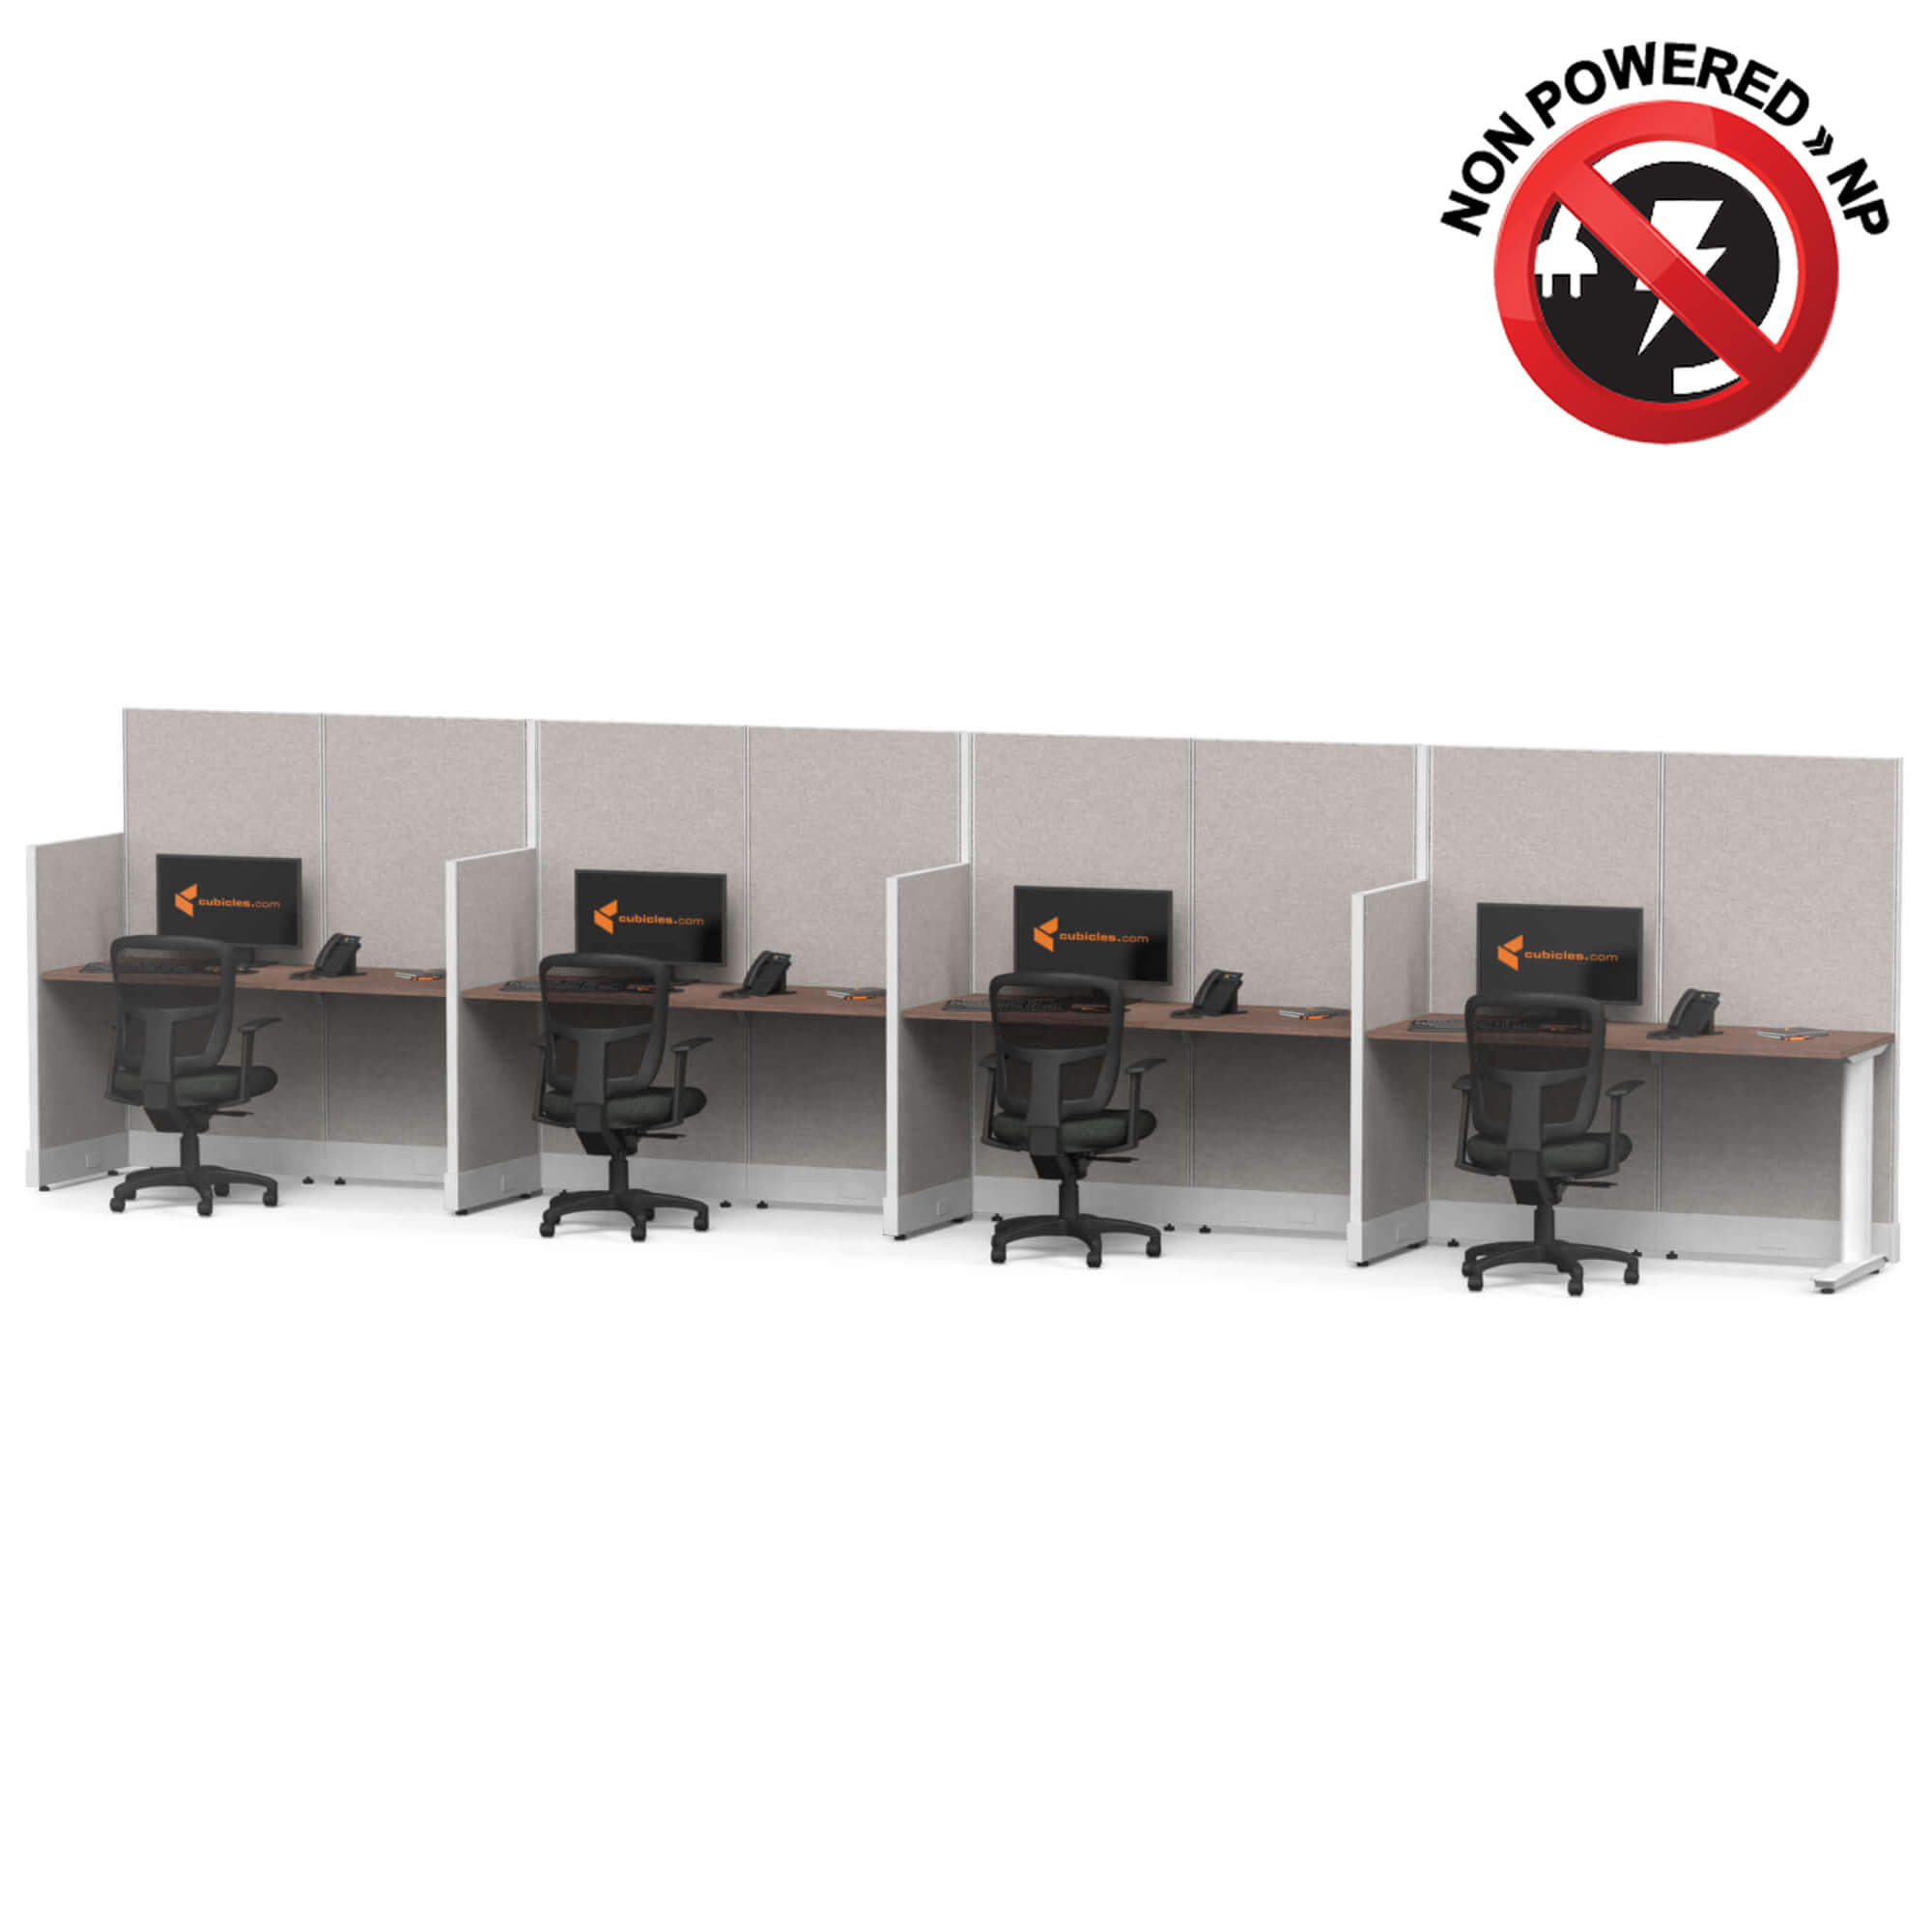 cubicle-desk-straight-4pack-non-powered.jpg